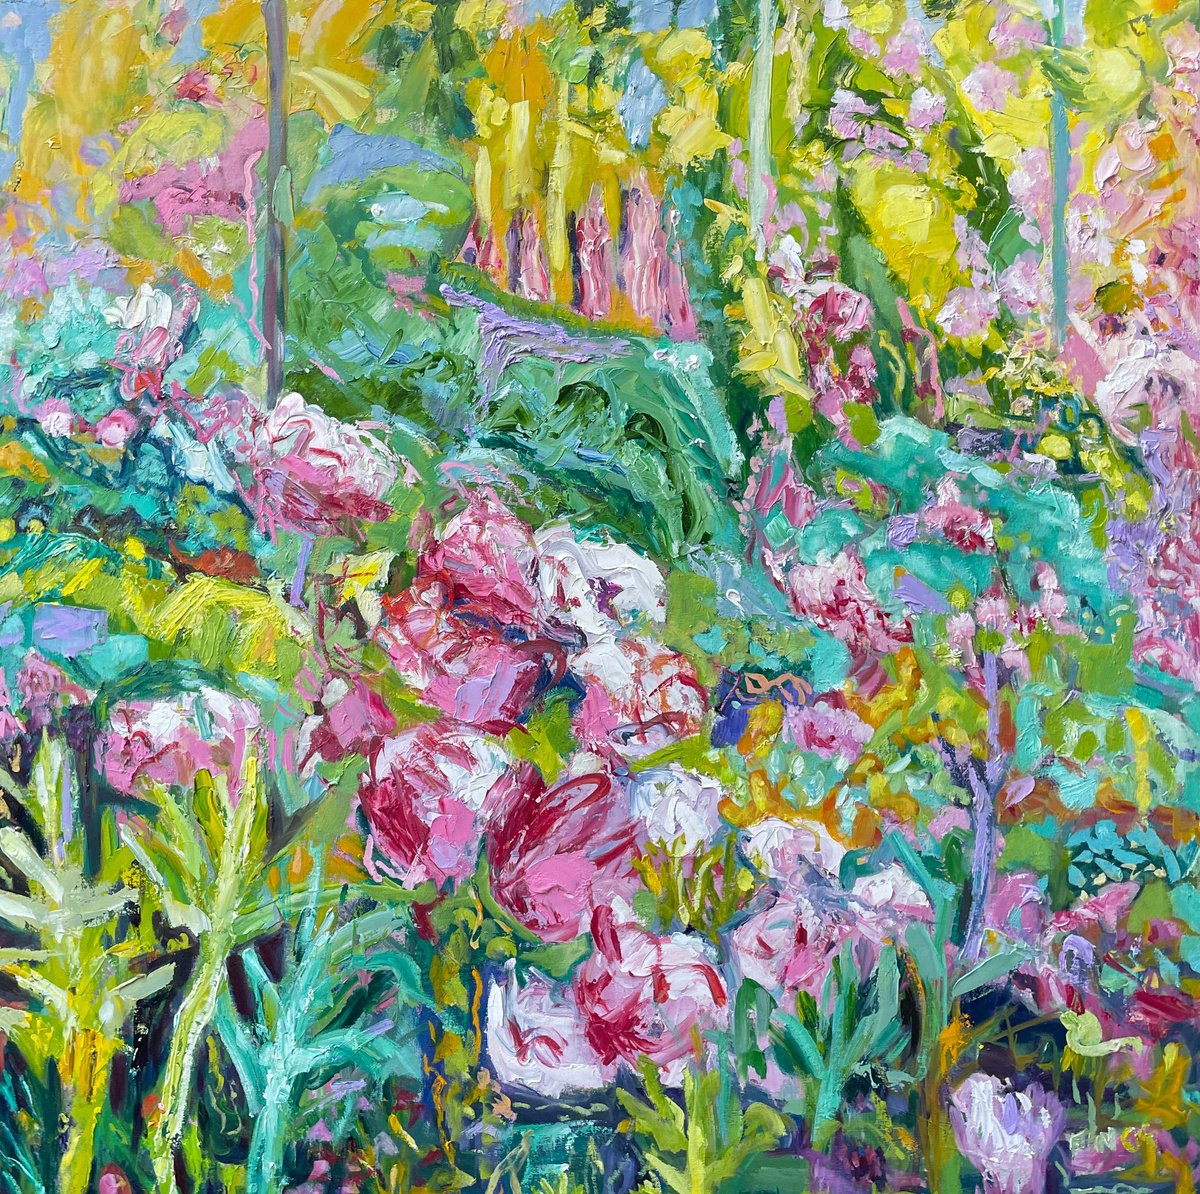 TREE FERNS AND RHODODENDRONS by Maureen Finck